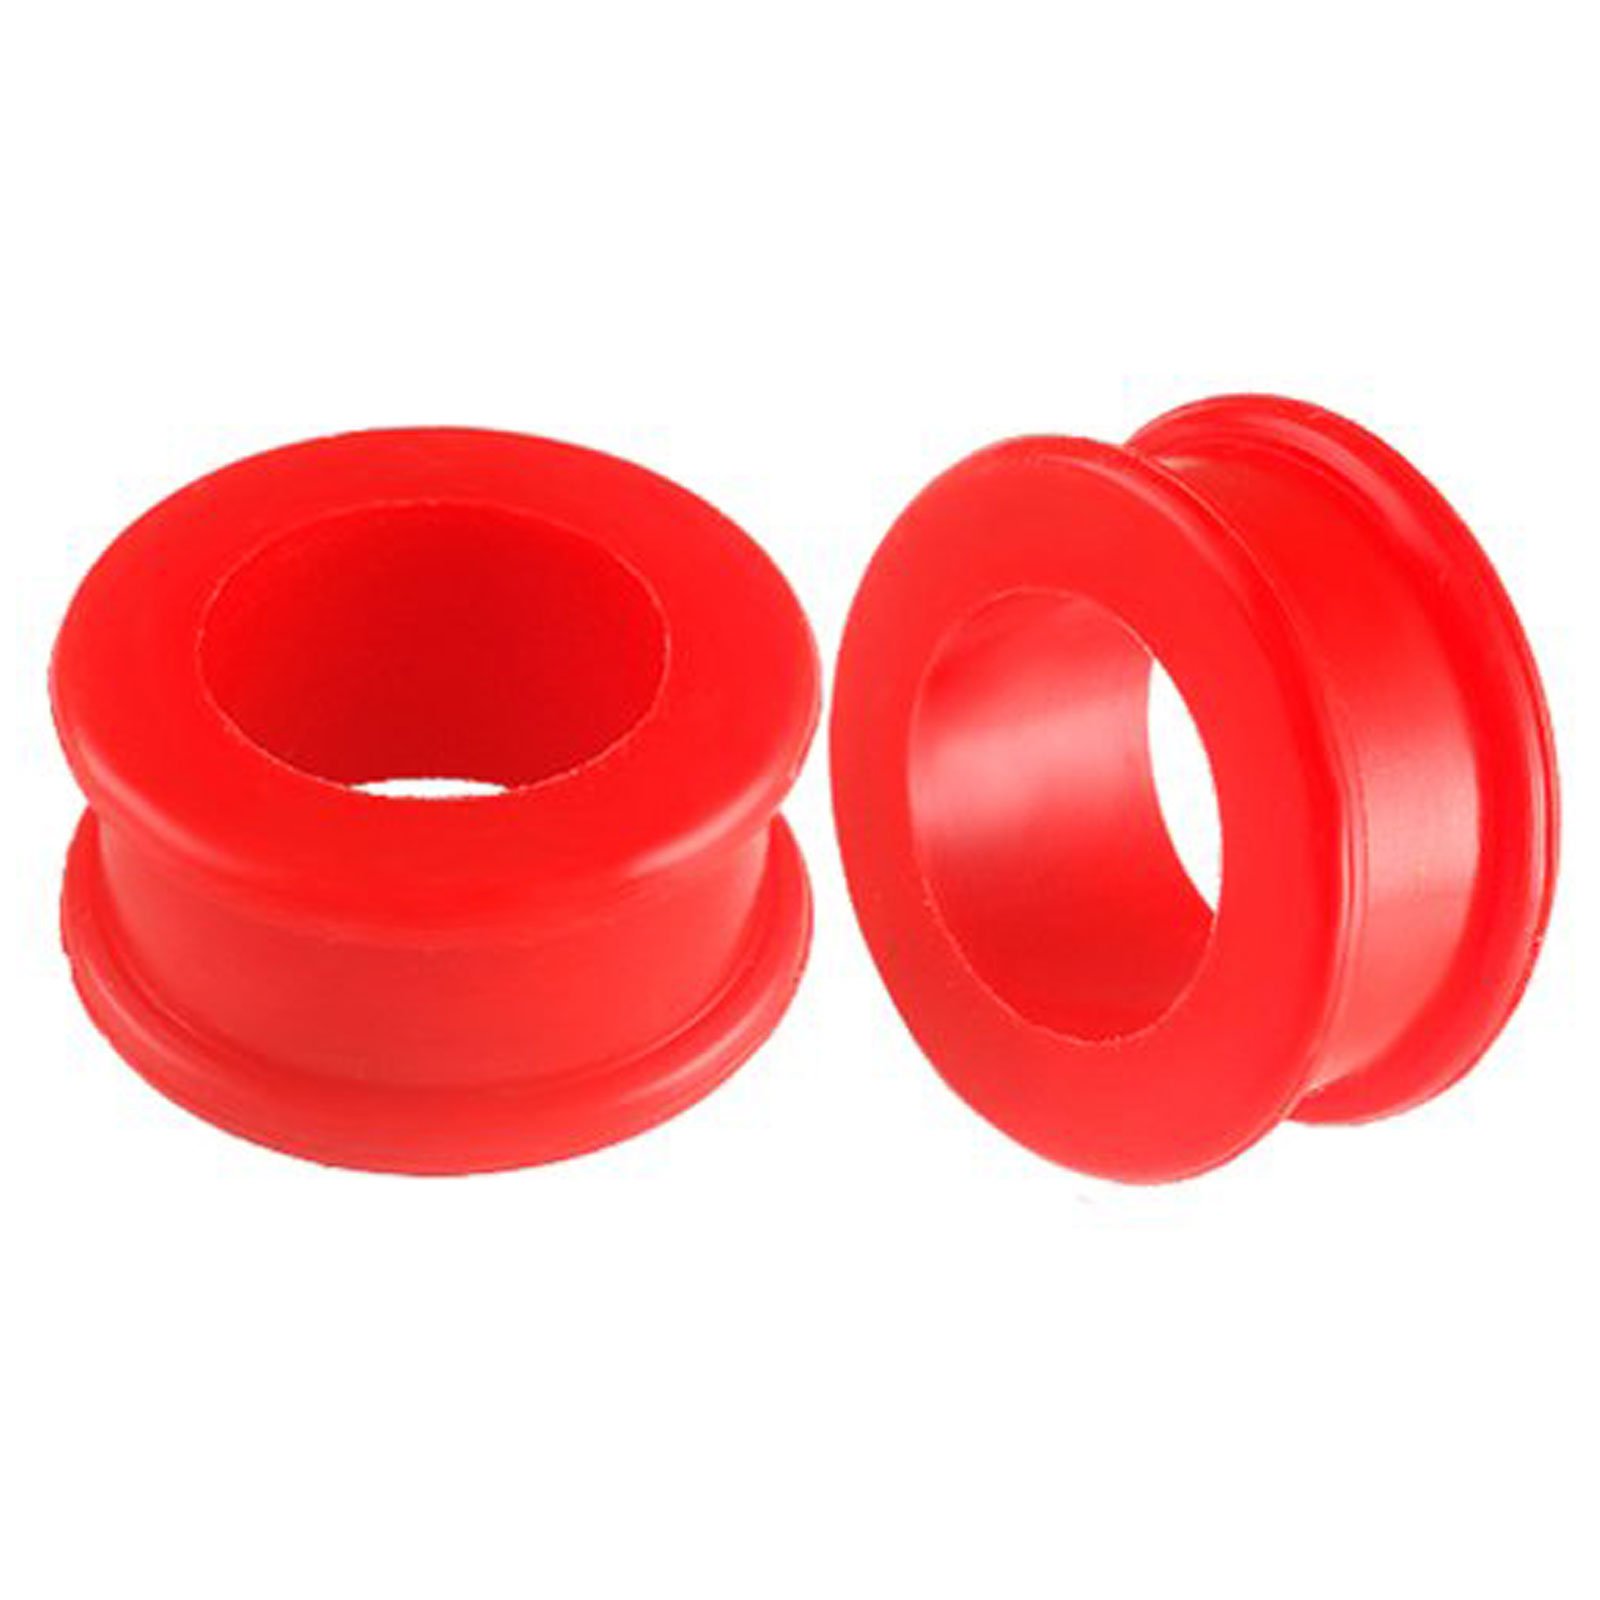 bodyjewellery 15/16 24mm Red Implant grade sili Double Flare Tunnels Ear Gauge Plugs SI01 AEBS Ear Stretching Stretchers Piercing 2Pcs